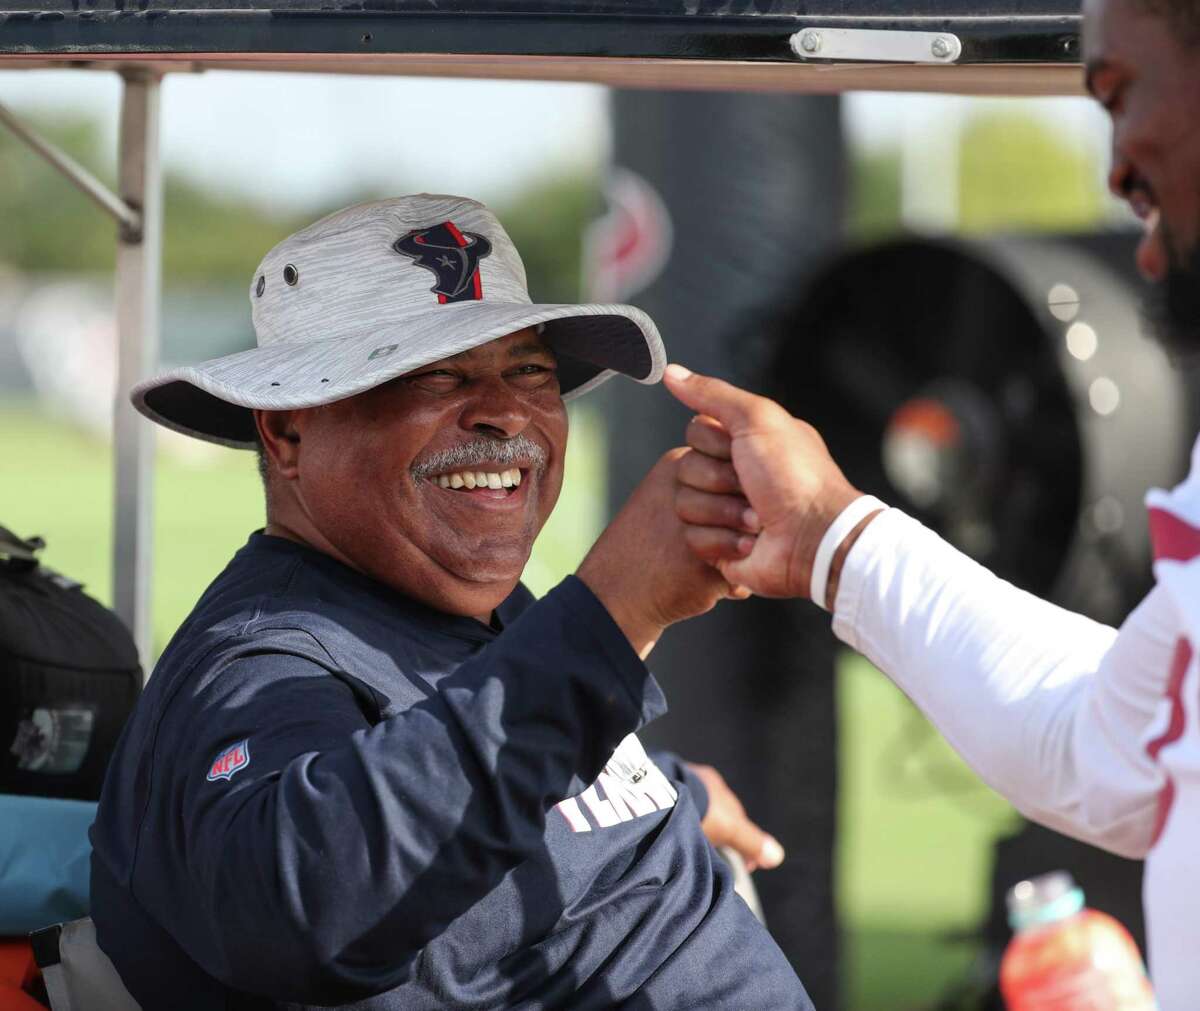 Romeo Crennel, who has worked for the Texans in various roles over the last eight years, announced his retirement last week.